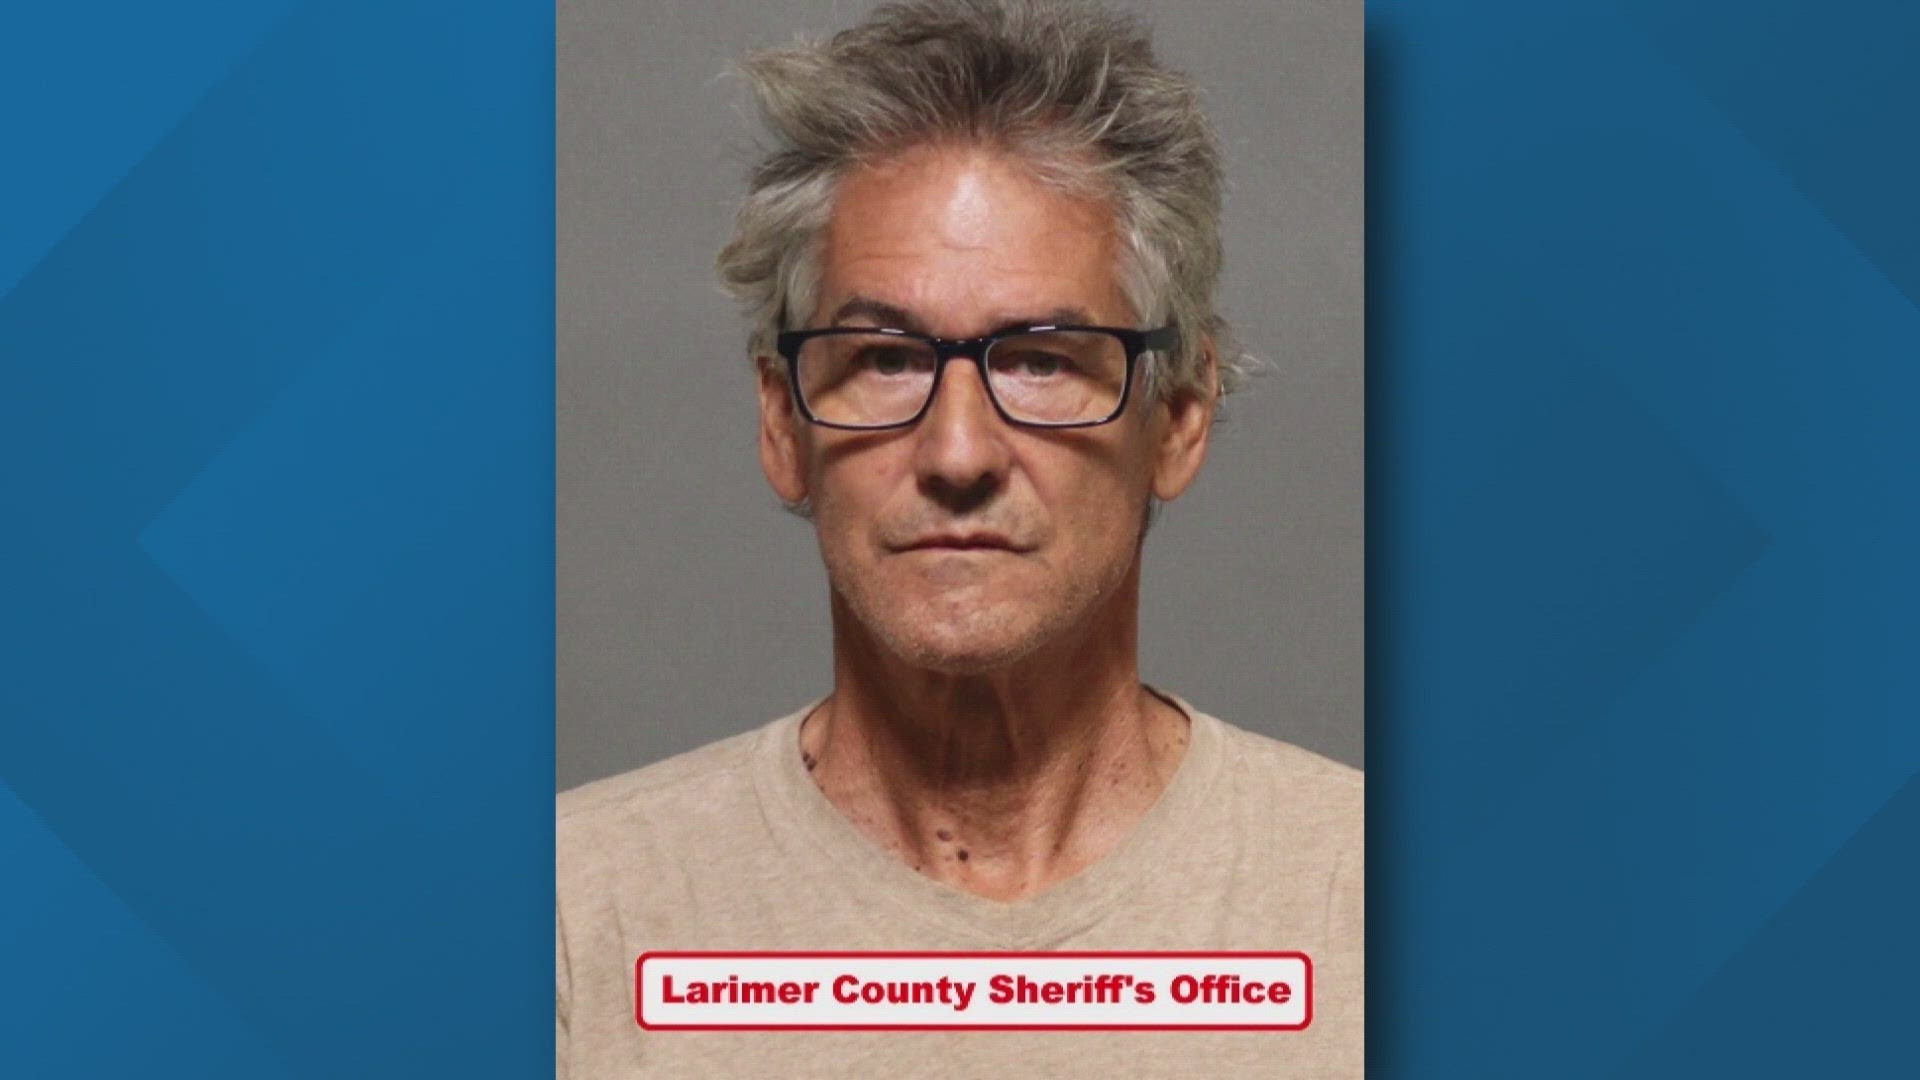 Rodney Pereira, 68, was arrested by the Larimer County Sheriff's Office for an incident that happened in 2022.